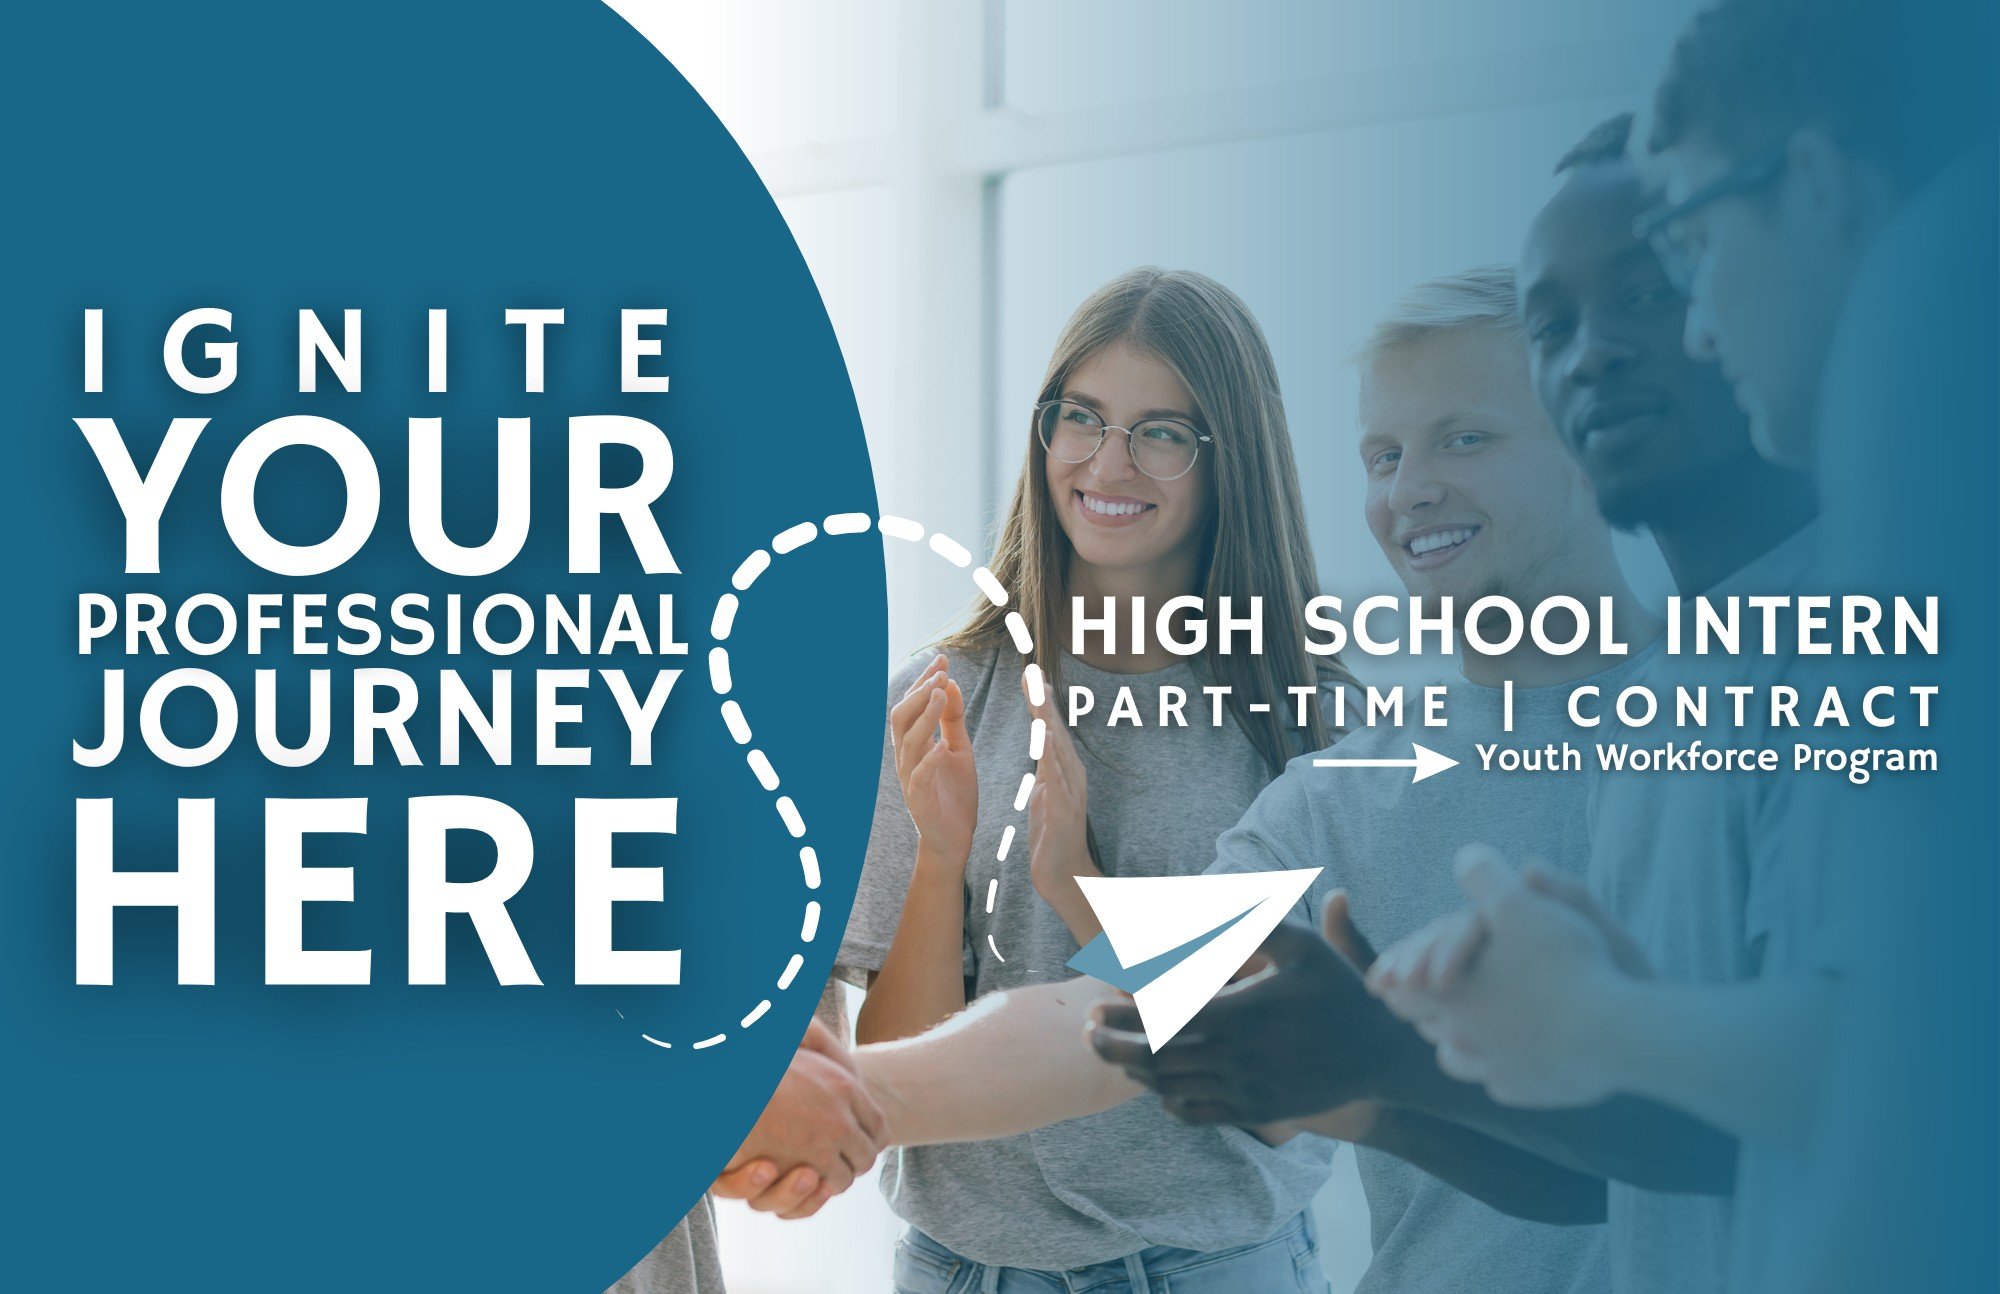 📌Now hiring -&gt;High School Intern&lt;- in the River Arts Summer Youth Workforce Program.
.
.
This is a contract role that provides opportunity for the youth of Lamoille County entering the workforce. This part-time summer role supports River Arts 